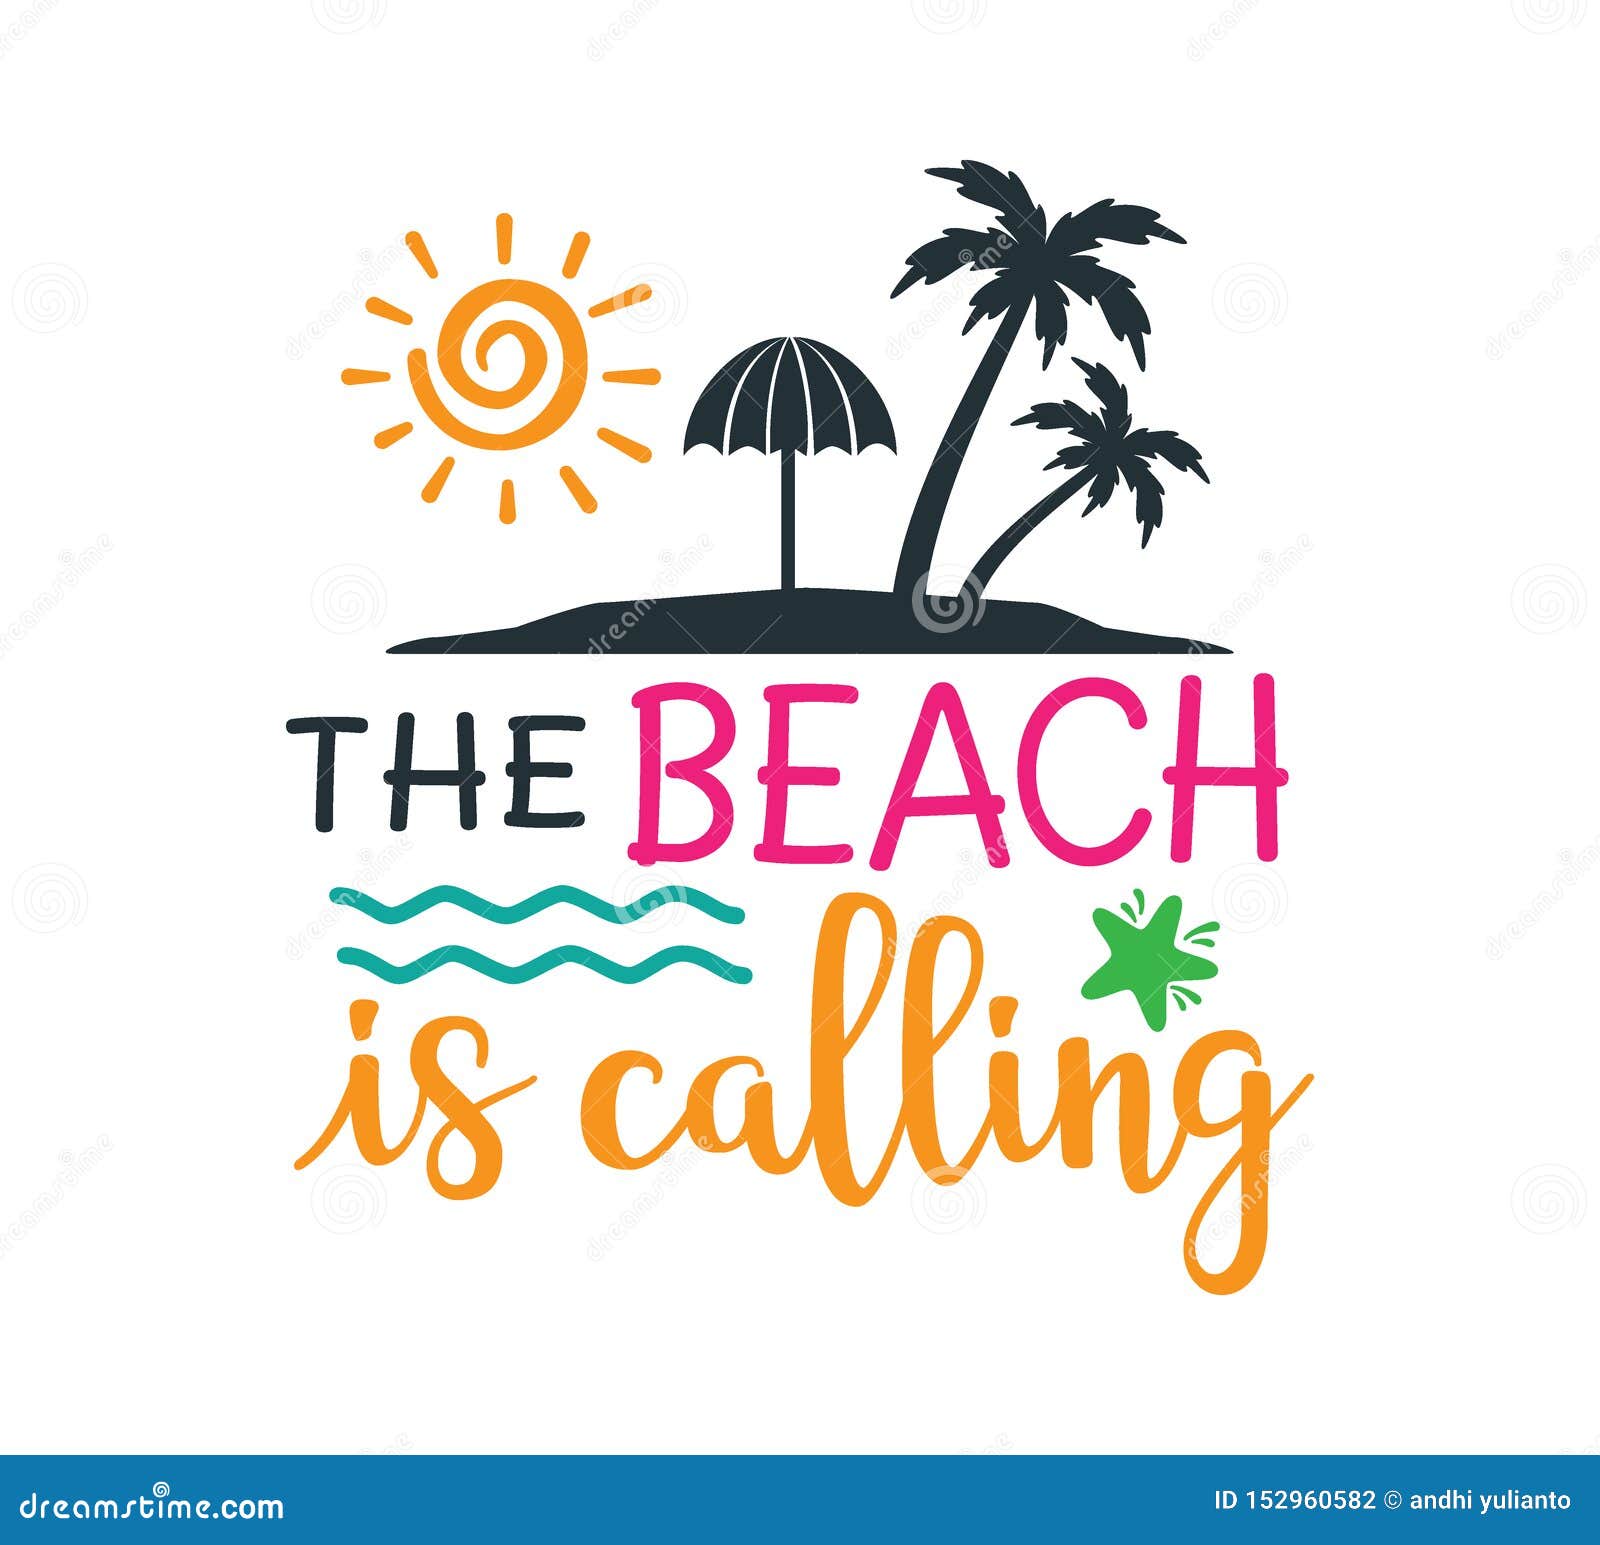 The Beach is Calling Saying Quote Vector Design for Printable Sign and ...